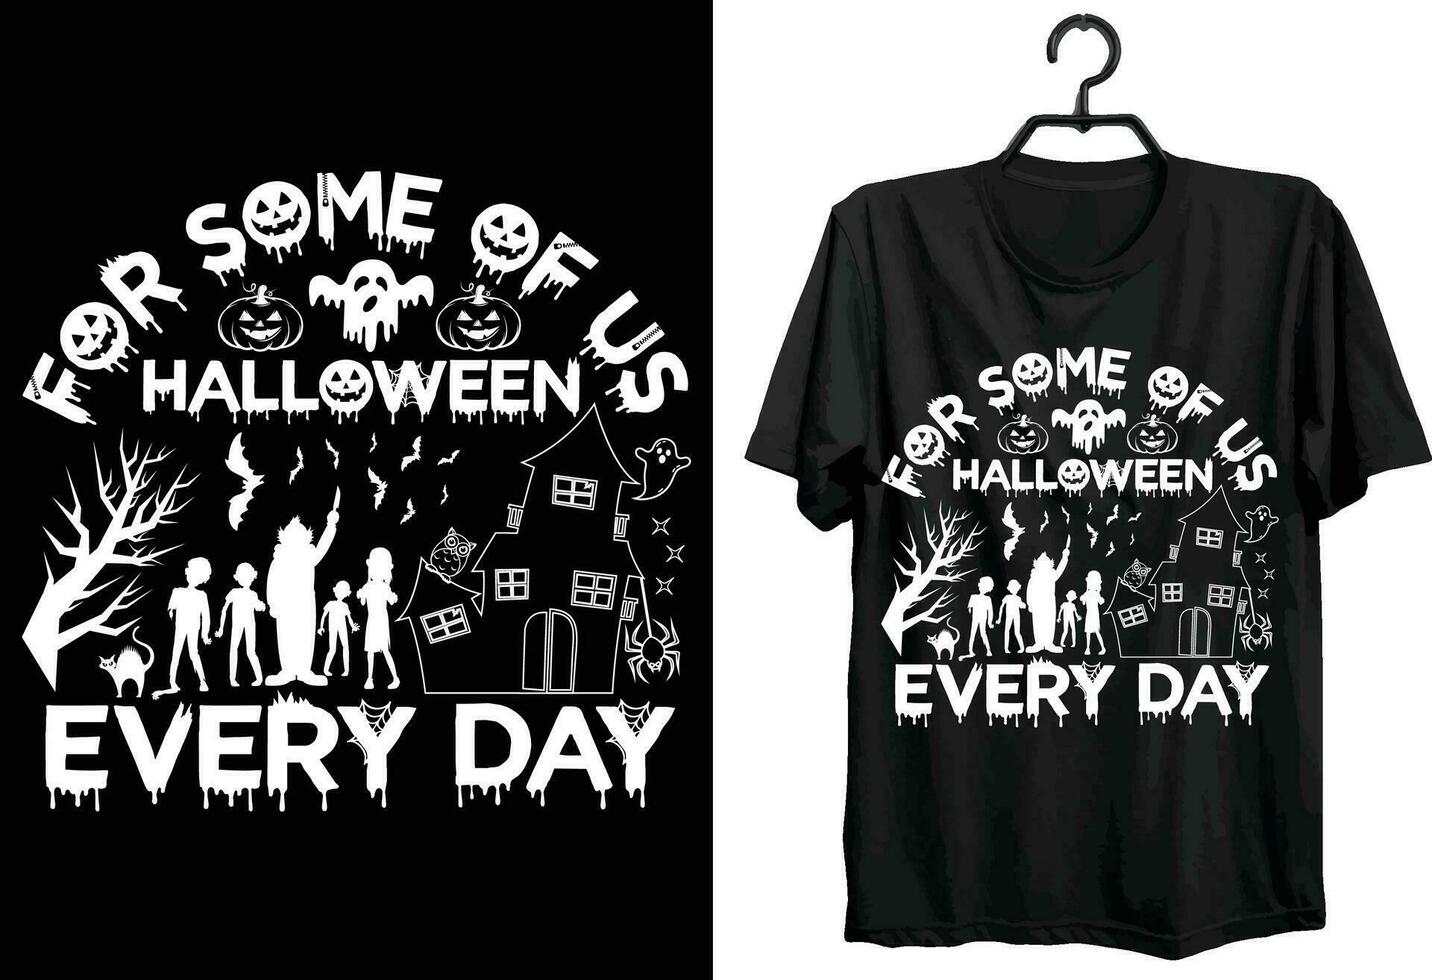 For Some Of Us Halloween Every Day. Halloween T-shirt Design. Funny Gift Item Halloween T-shirt Design For Halloween Lovers. vector